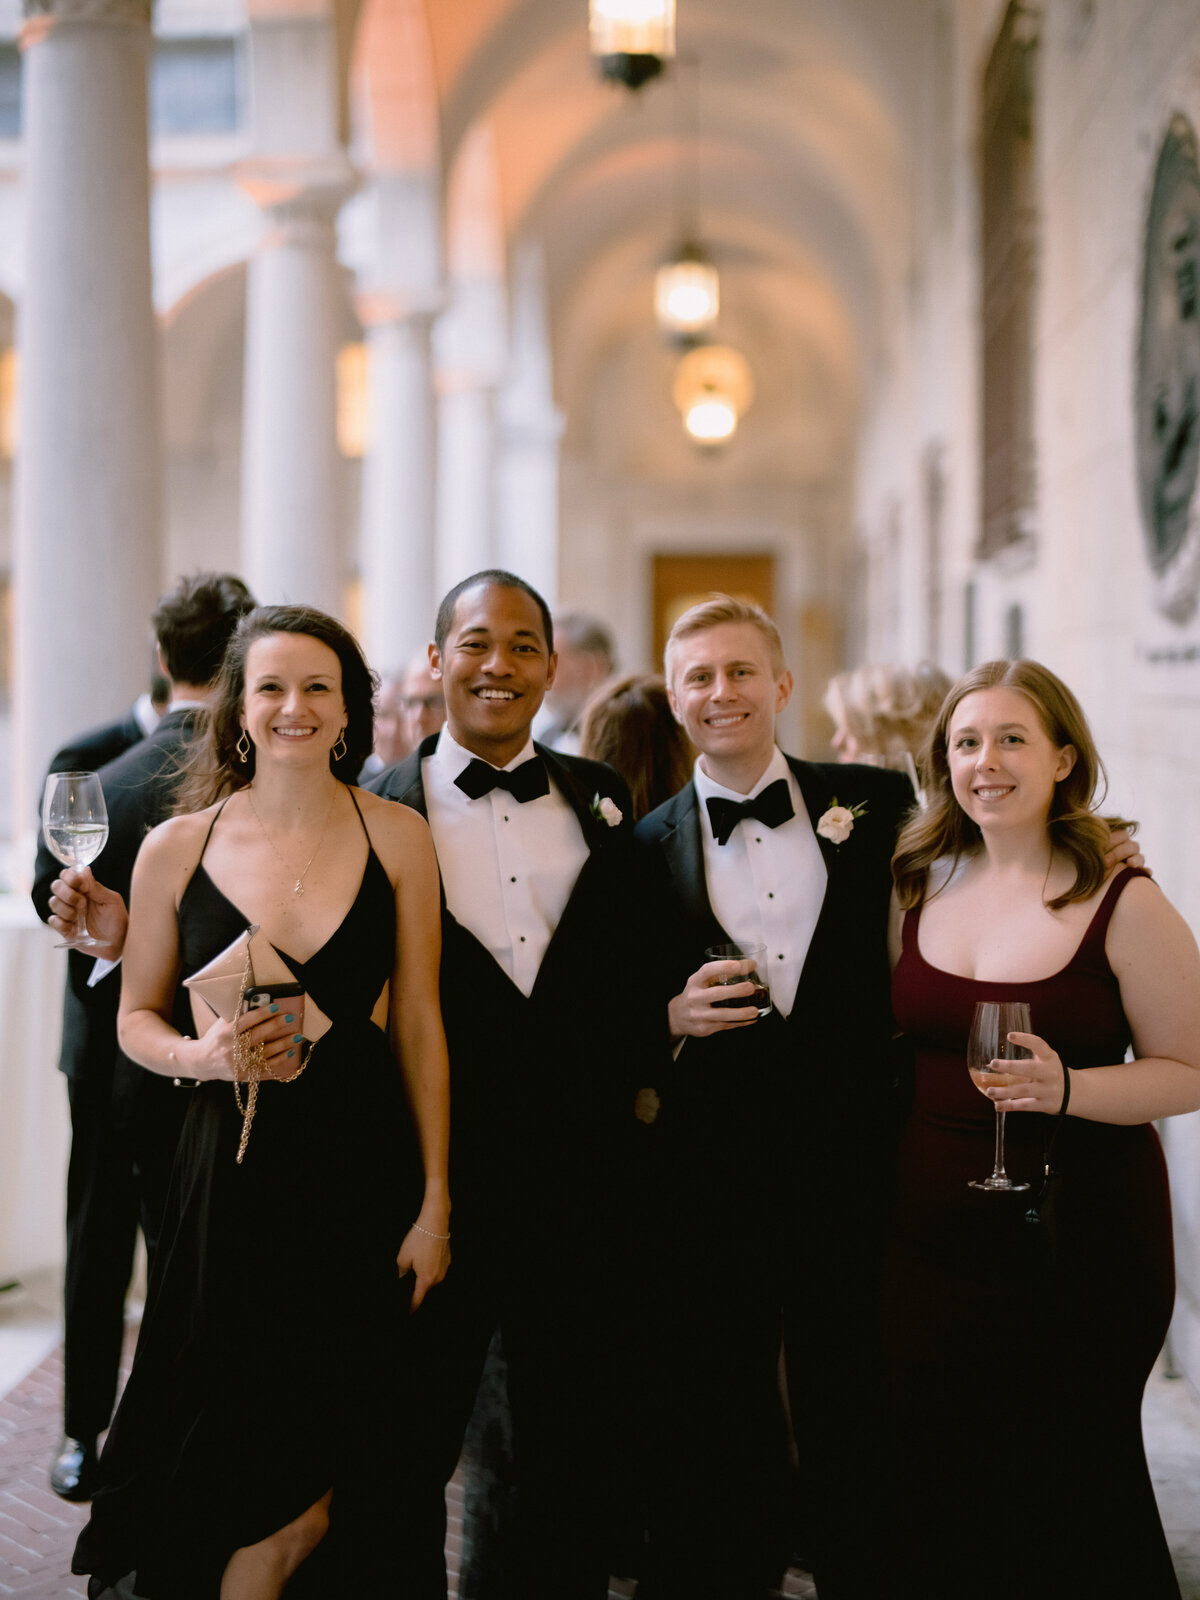 Wedding guests pose with drinks in the courtyard of a Boston Public Library wedding cocktail hour